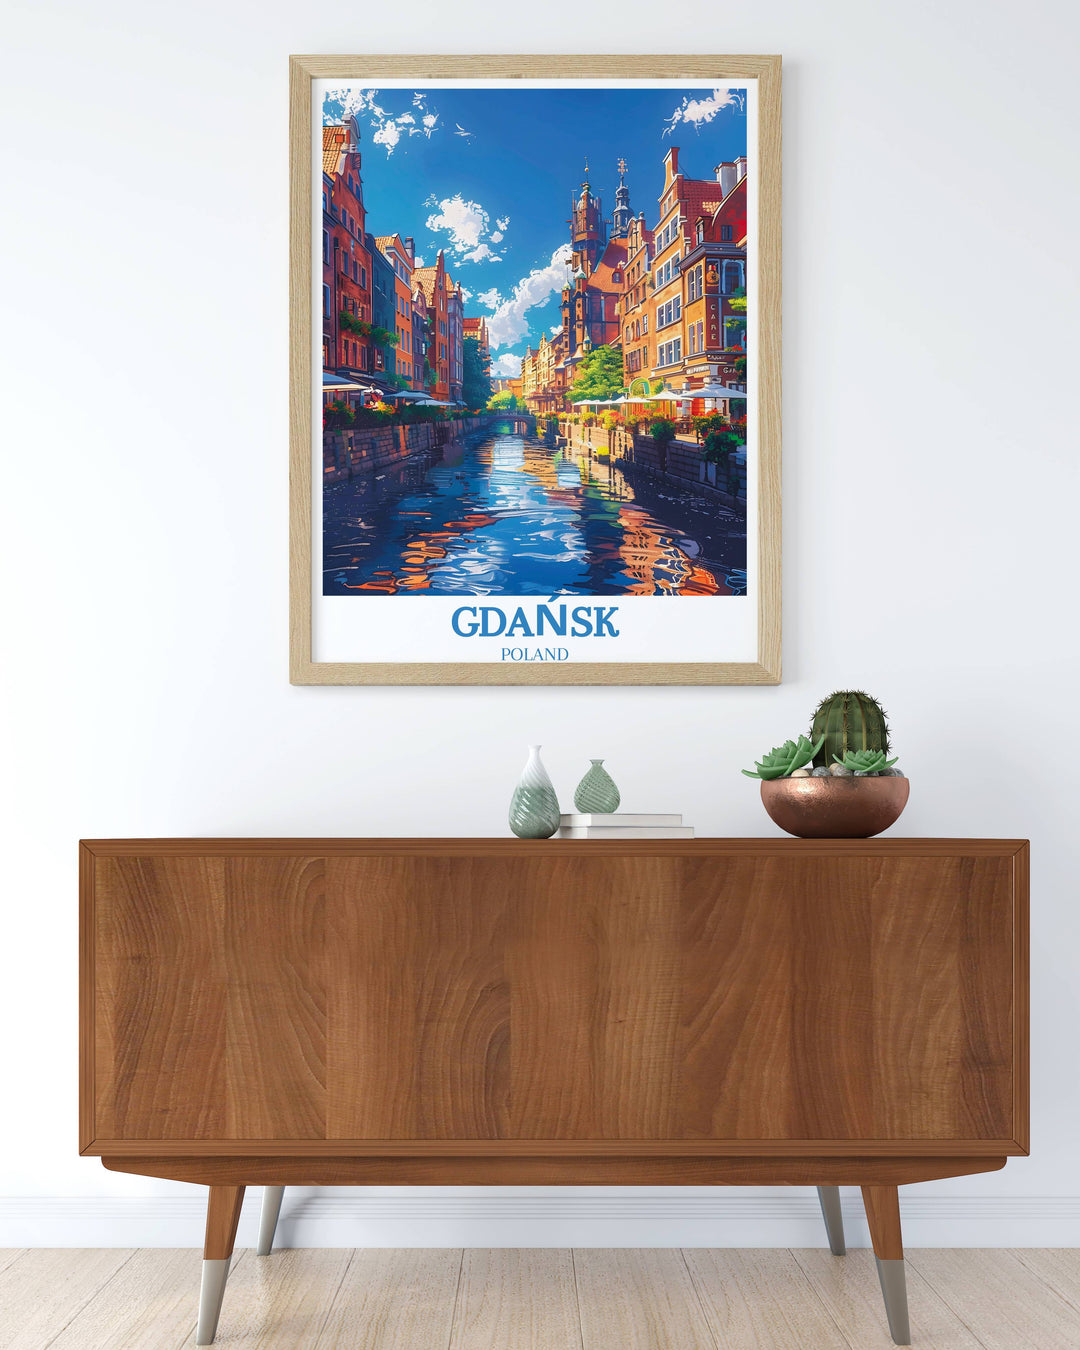 An elegant Gdańsk Wall Decor item that combines modern aesthetics with the timeless beauty of Gdańsks landscapes, suitable for any interior setting.